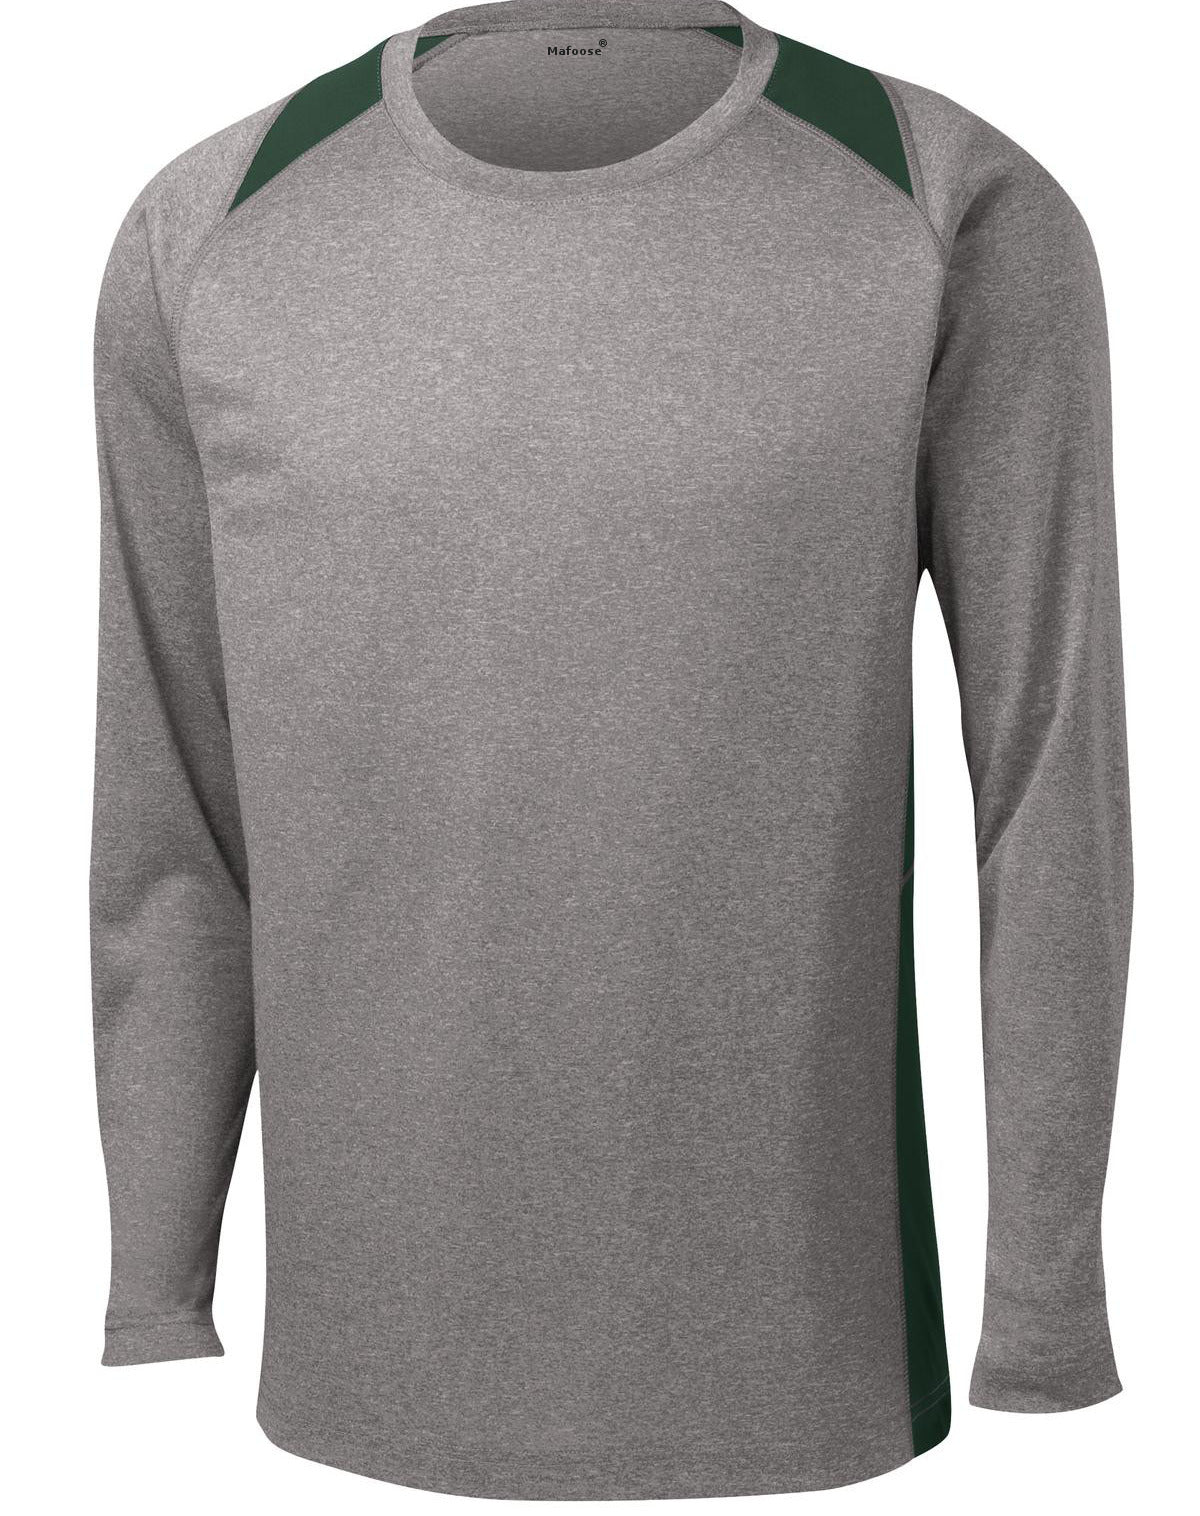 Mafoose Men's Long Sleeve Heather Colorblock Contender Tee Shirt Vintage Heather/ Forest Green-Front